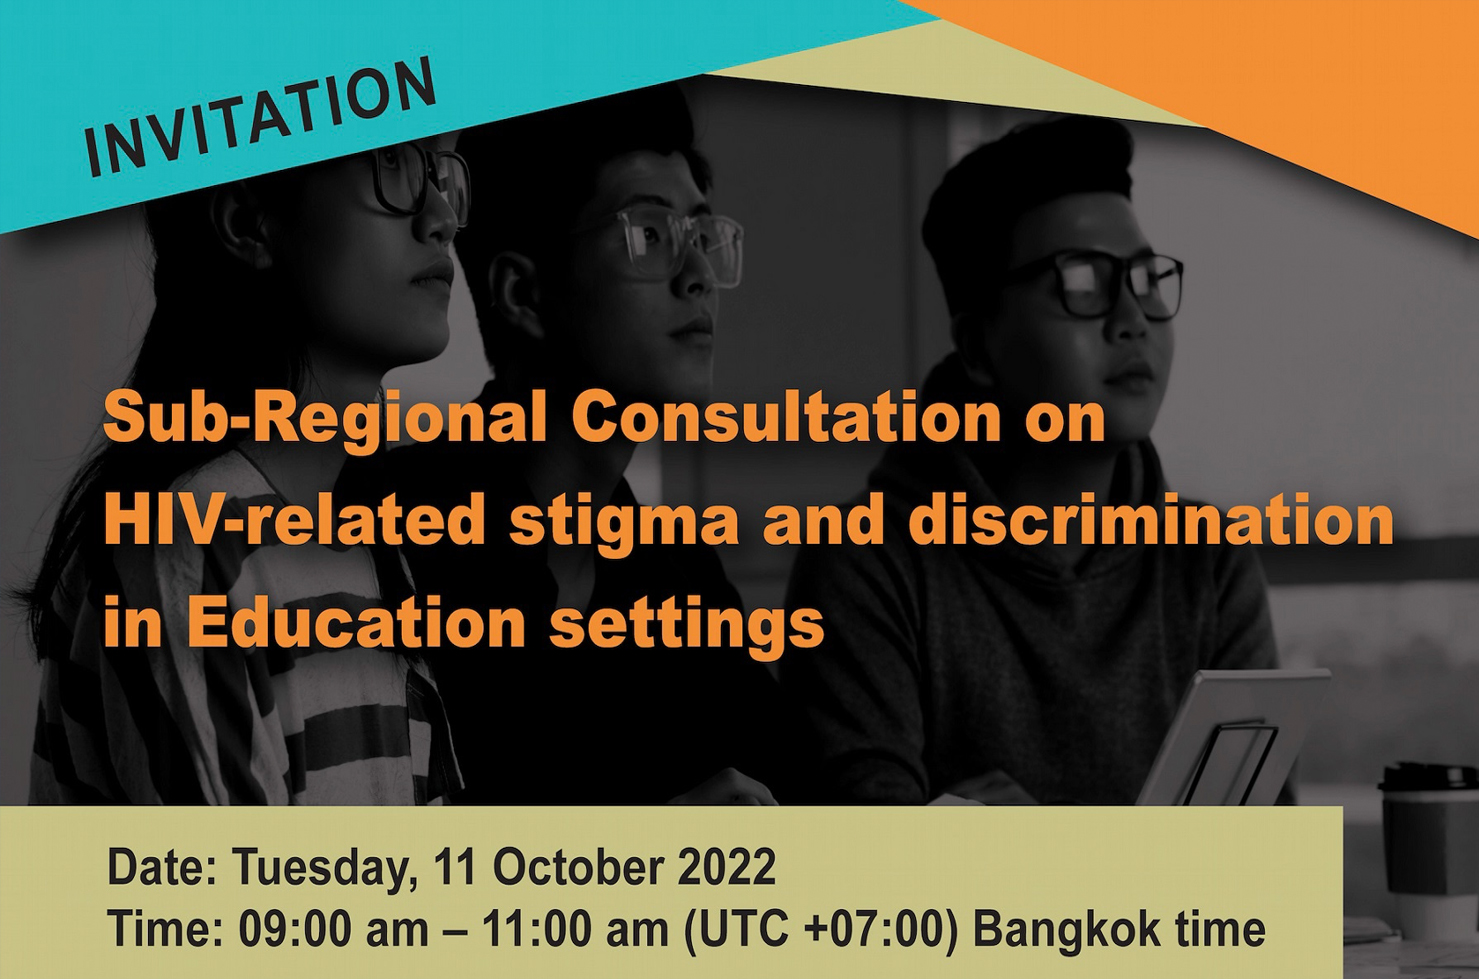 Save the Date: Sub-Regional Consultation on HIV-related Stigma and Discrimination in Education settings 